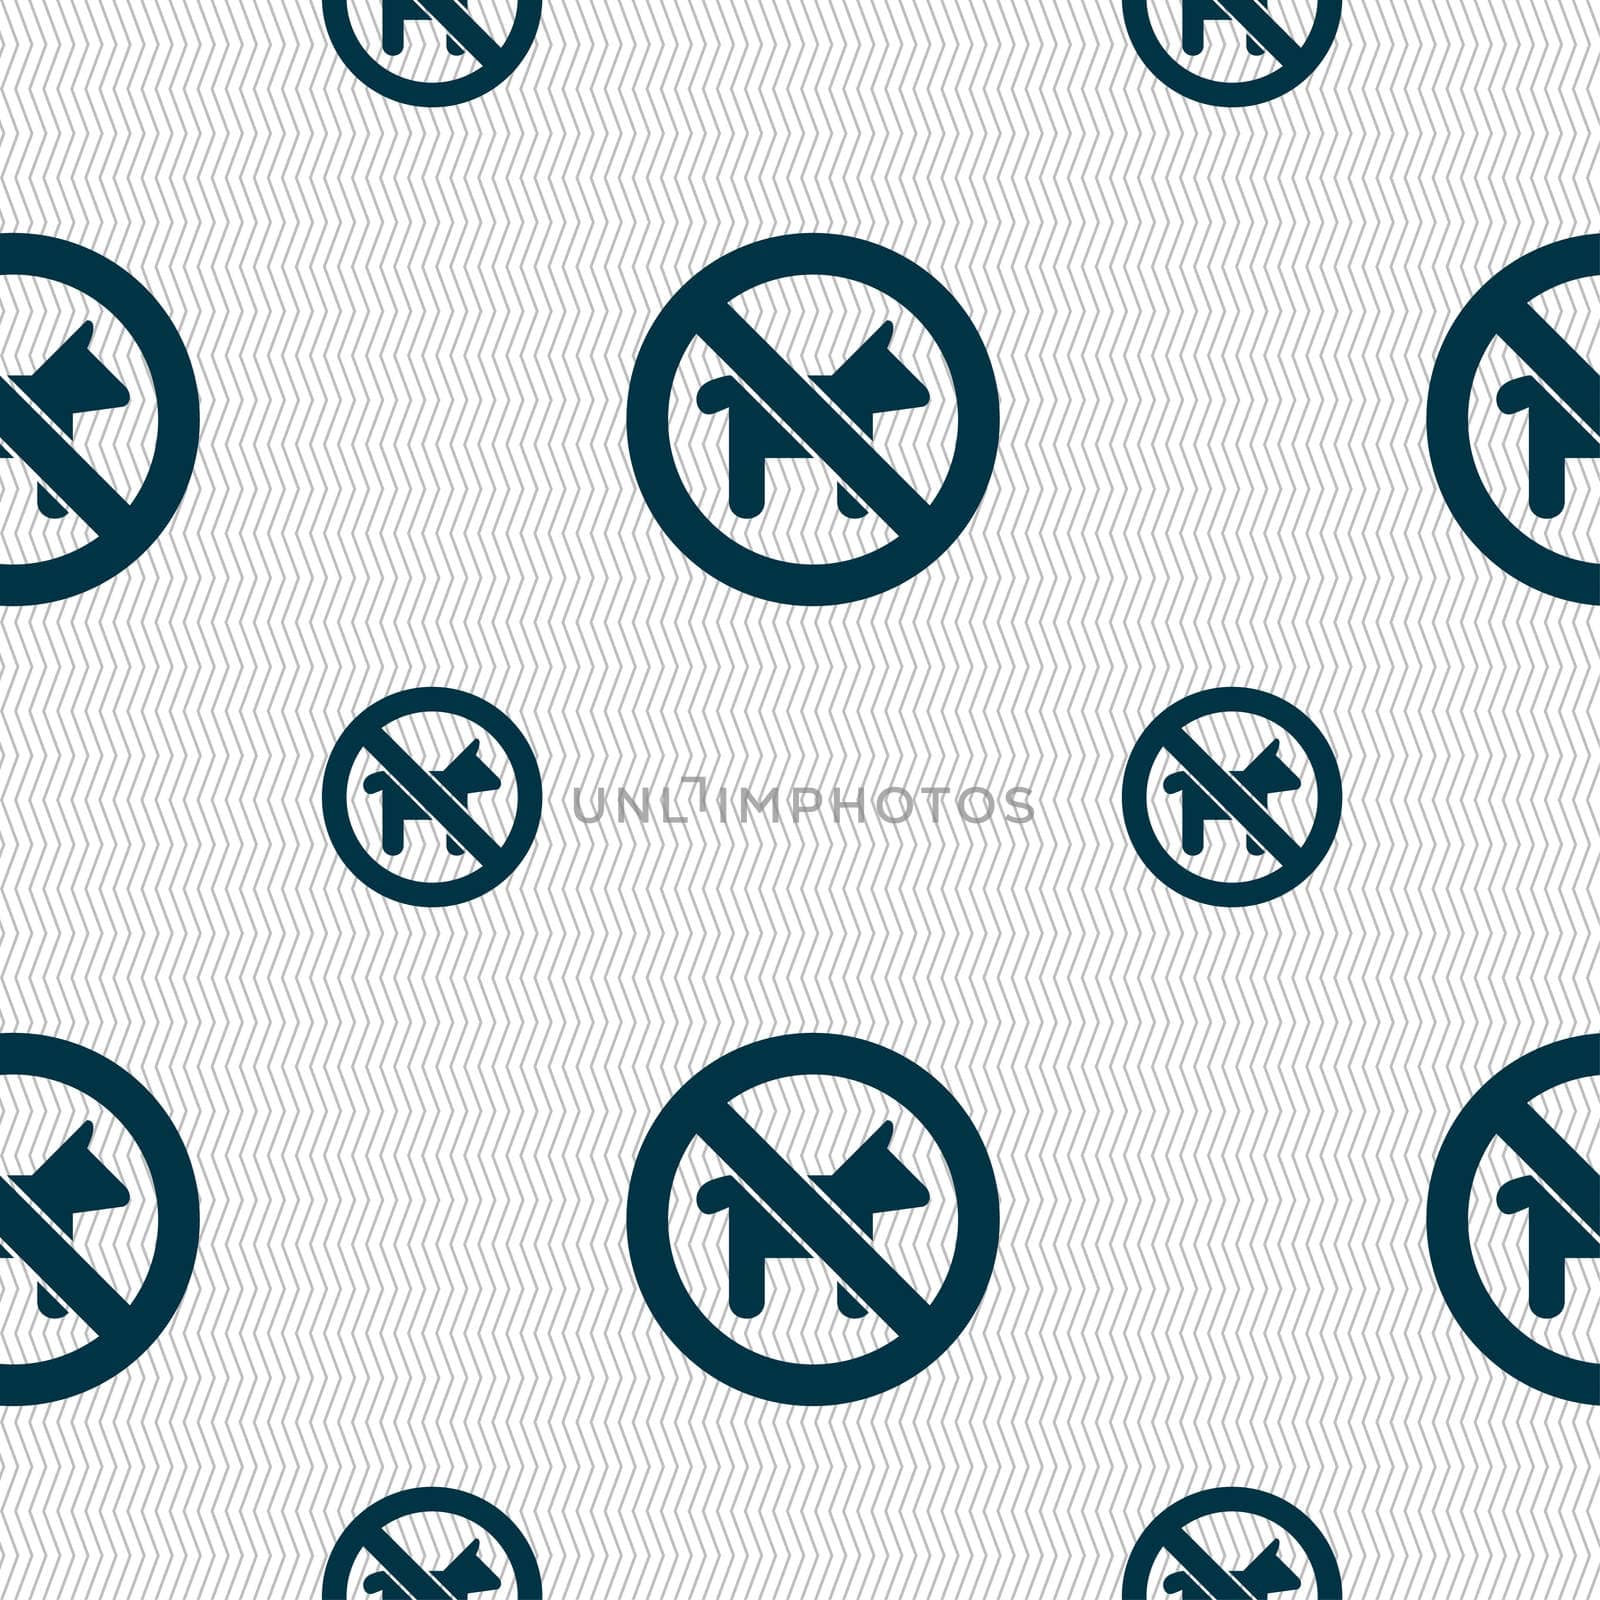 dog walking is prohibited icon sign. Seamless pattern with geometric texture. illustration